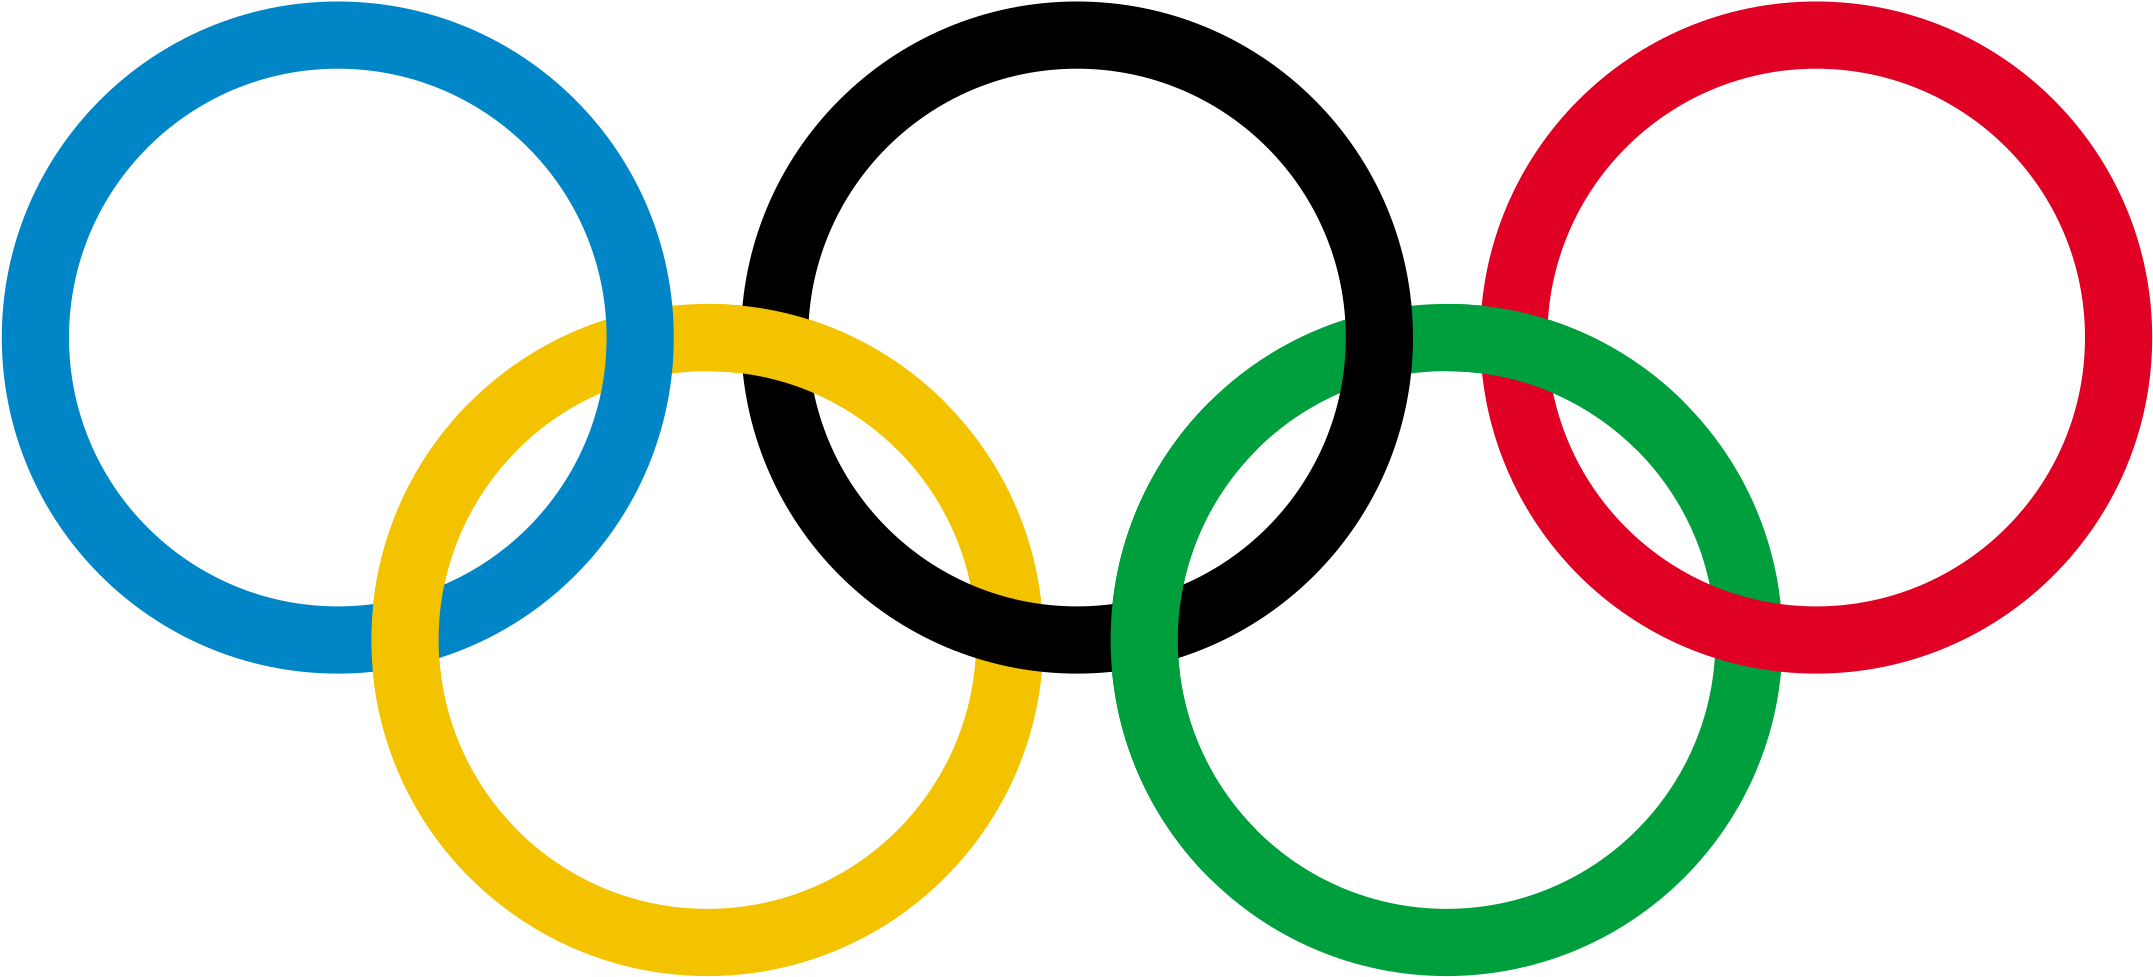 Big Image - Olympic Rings Facts (2400x1252)